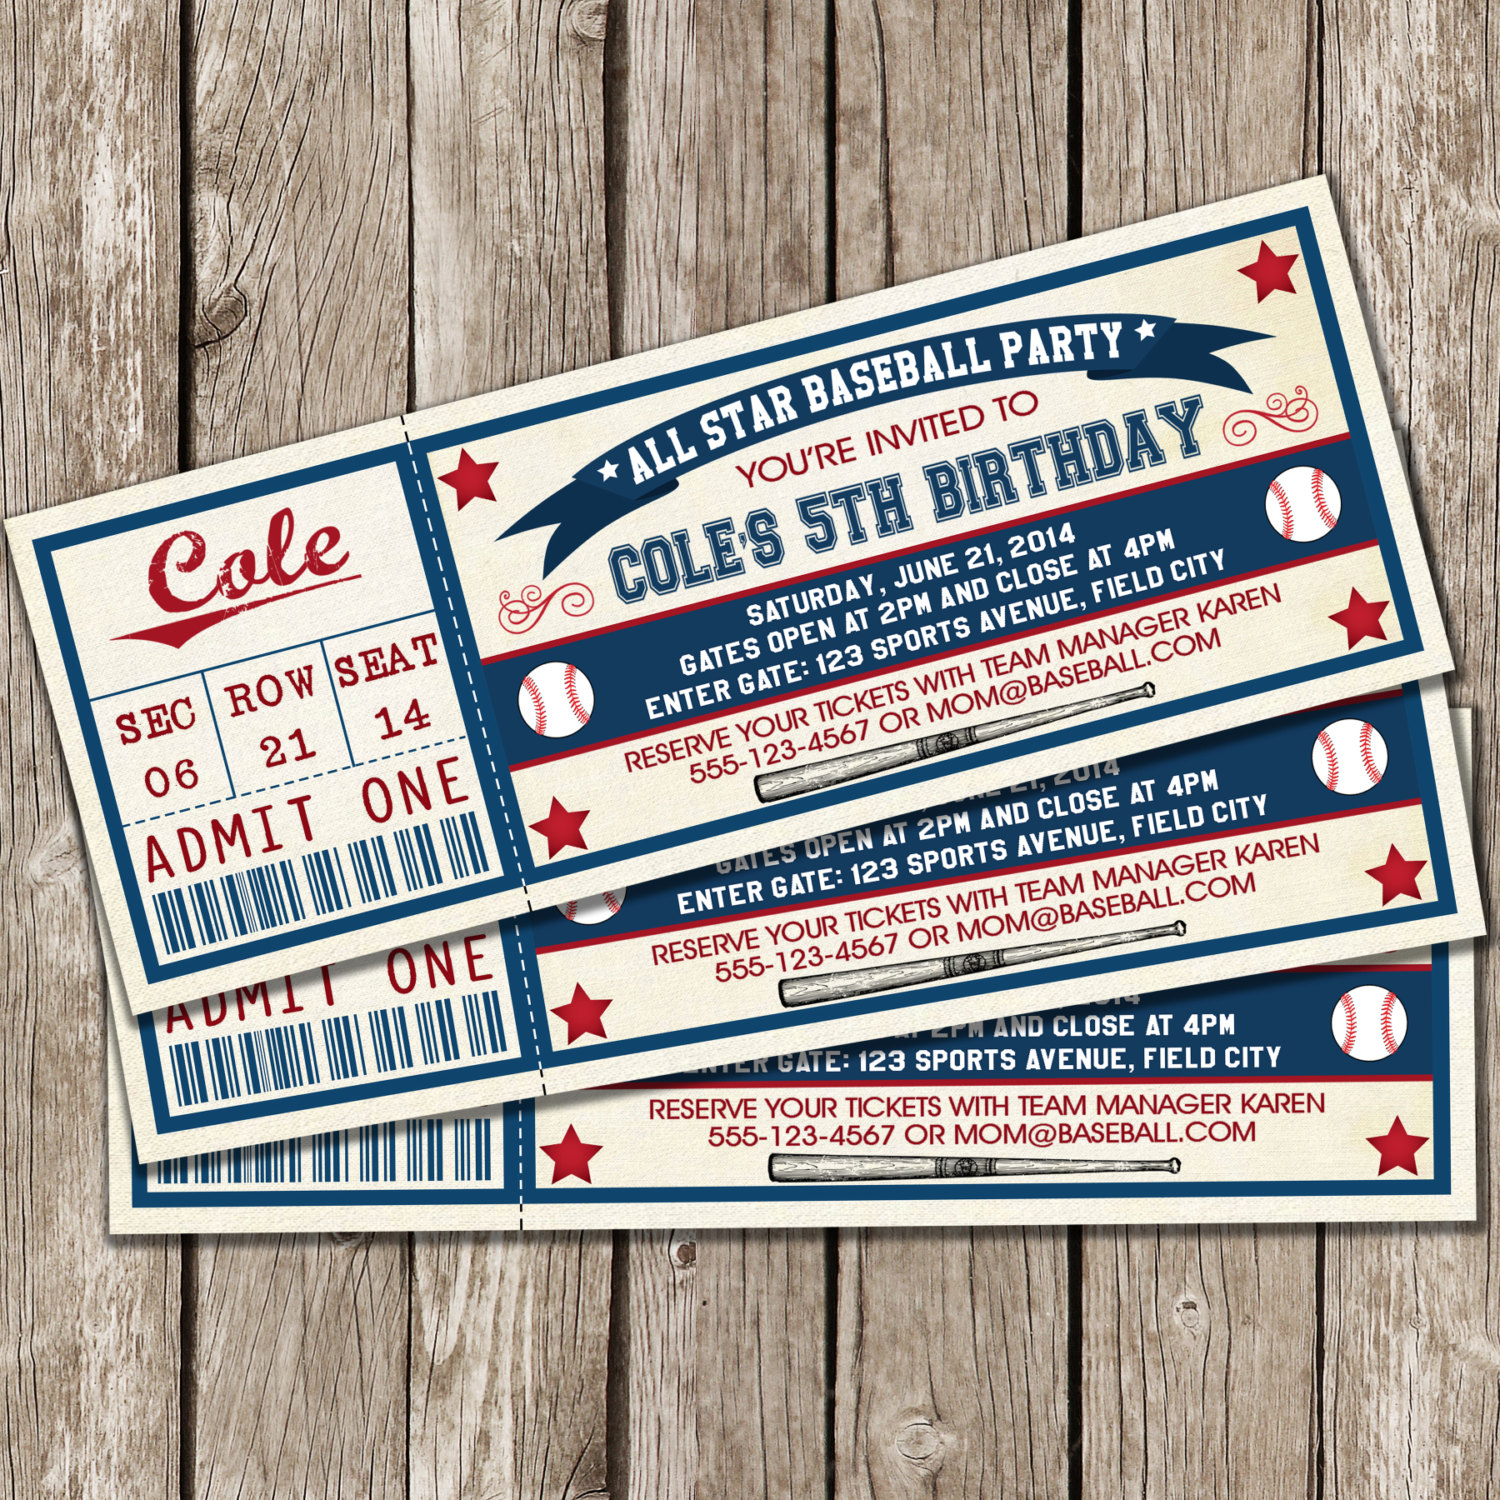 011 Kcko98xgi Template Ideas Ticket Invitation Awful Free Baseball intended for sizing 1500 X 1500